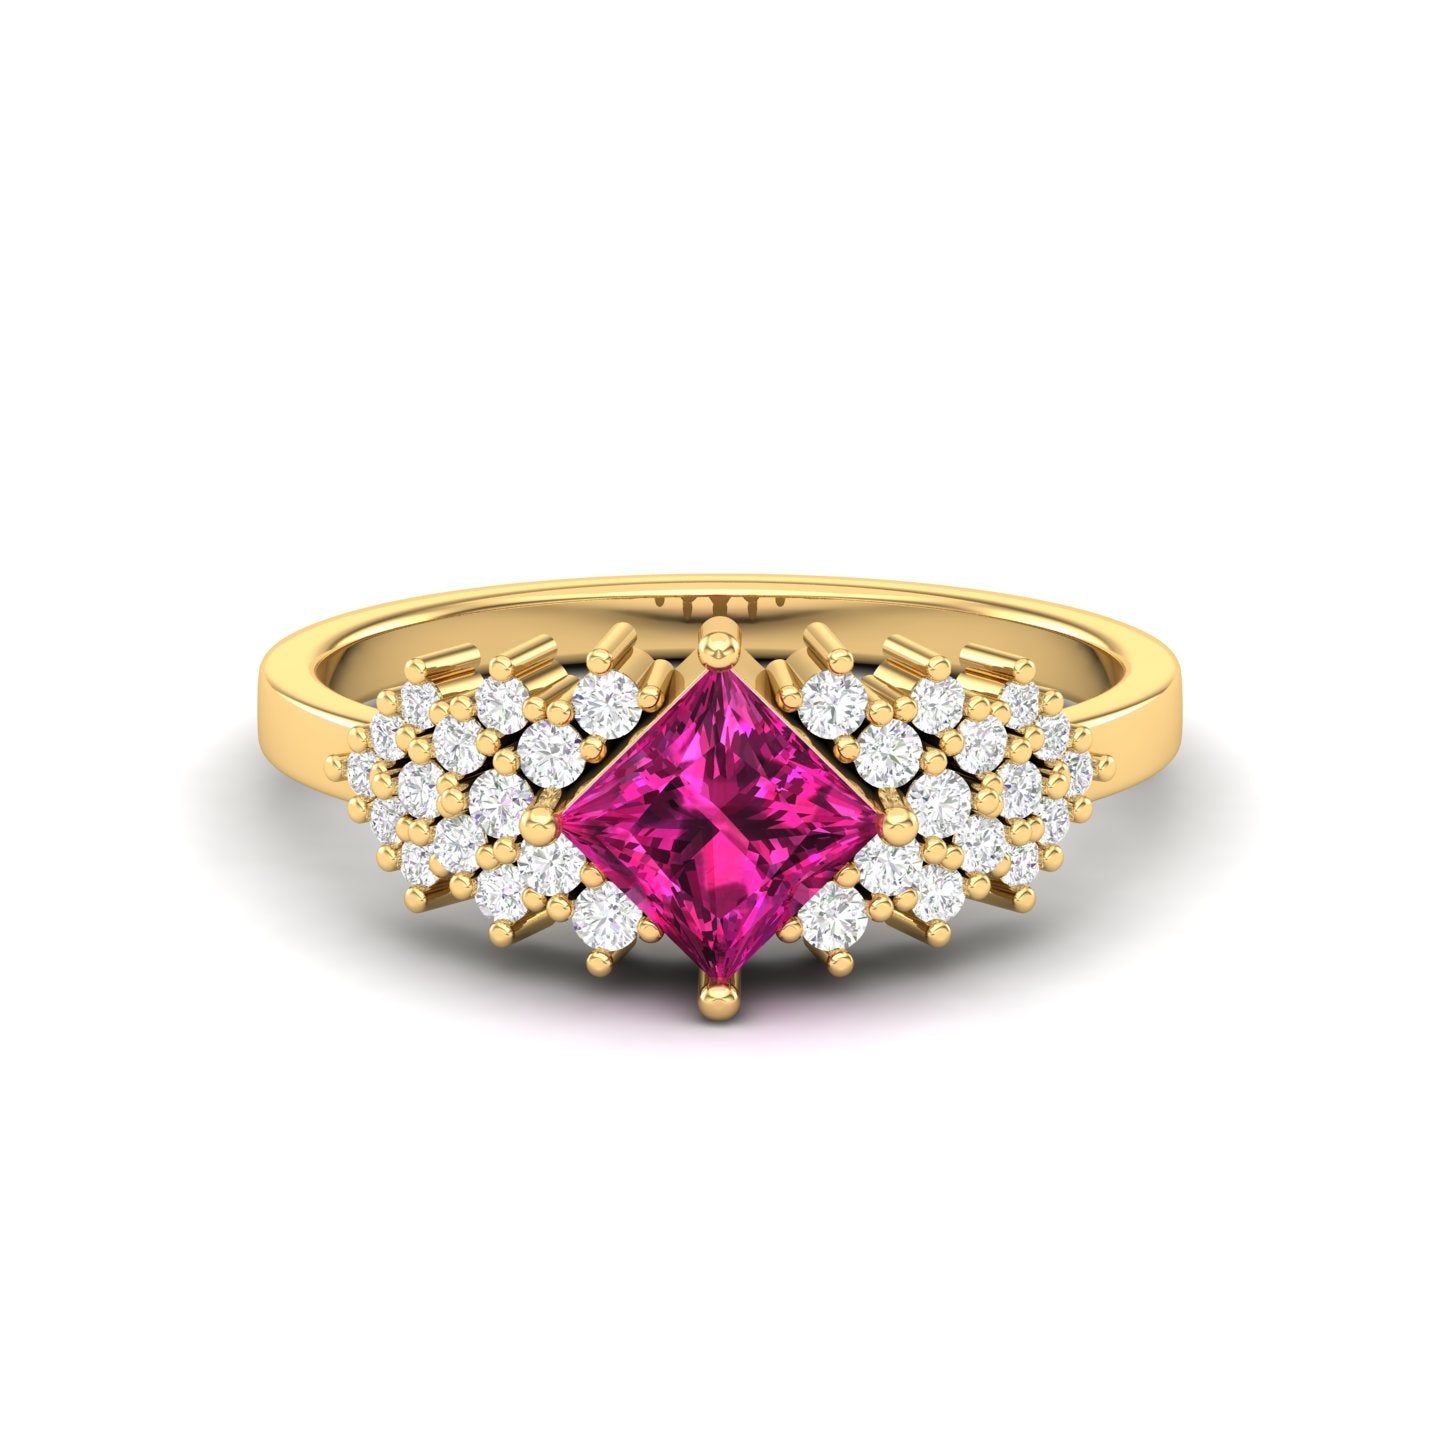 Maurya Pink Amethyst Queen Bee Engagement Ring with Accent Diamonds